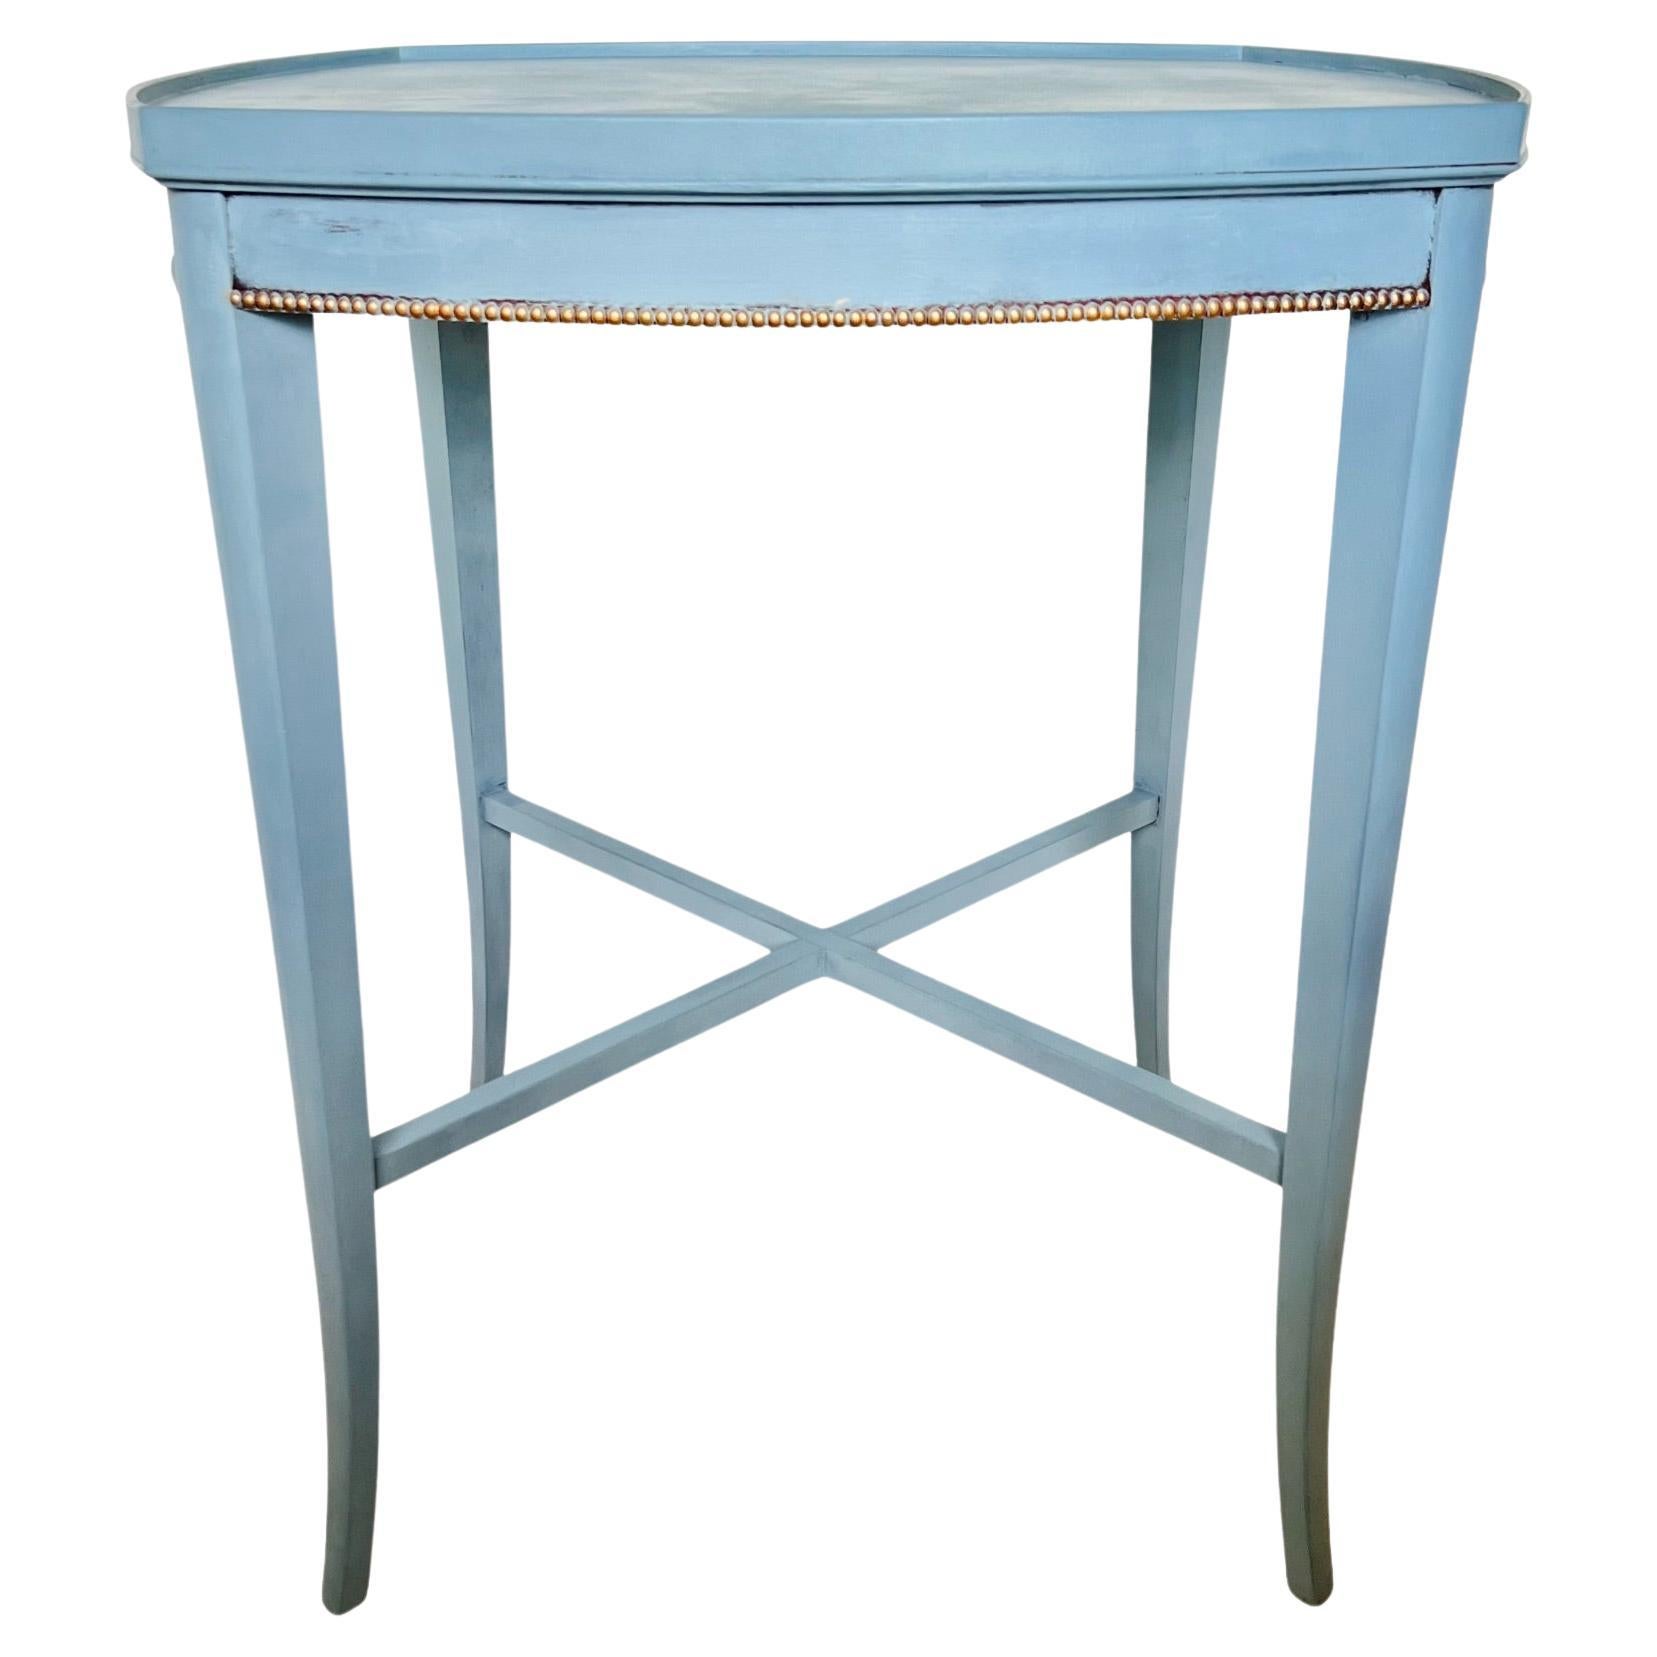 Vintage Refinished French Blue Side Table with Gold Bead Edge